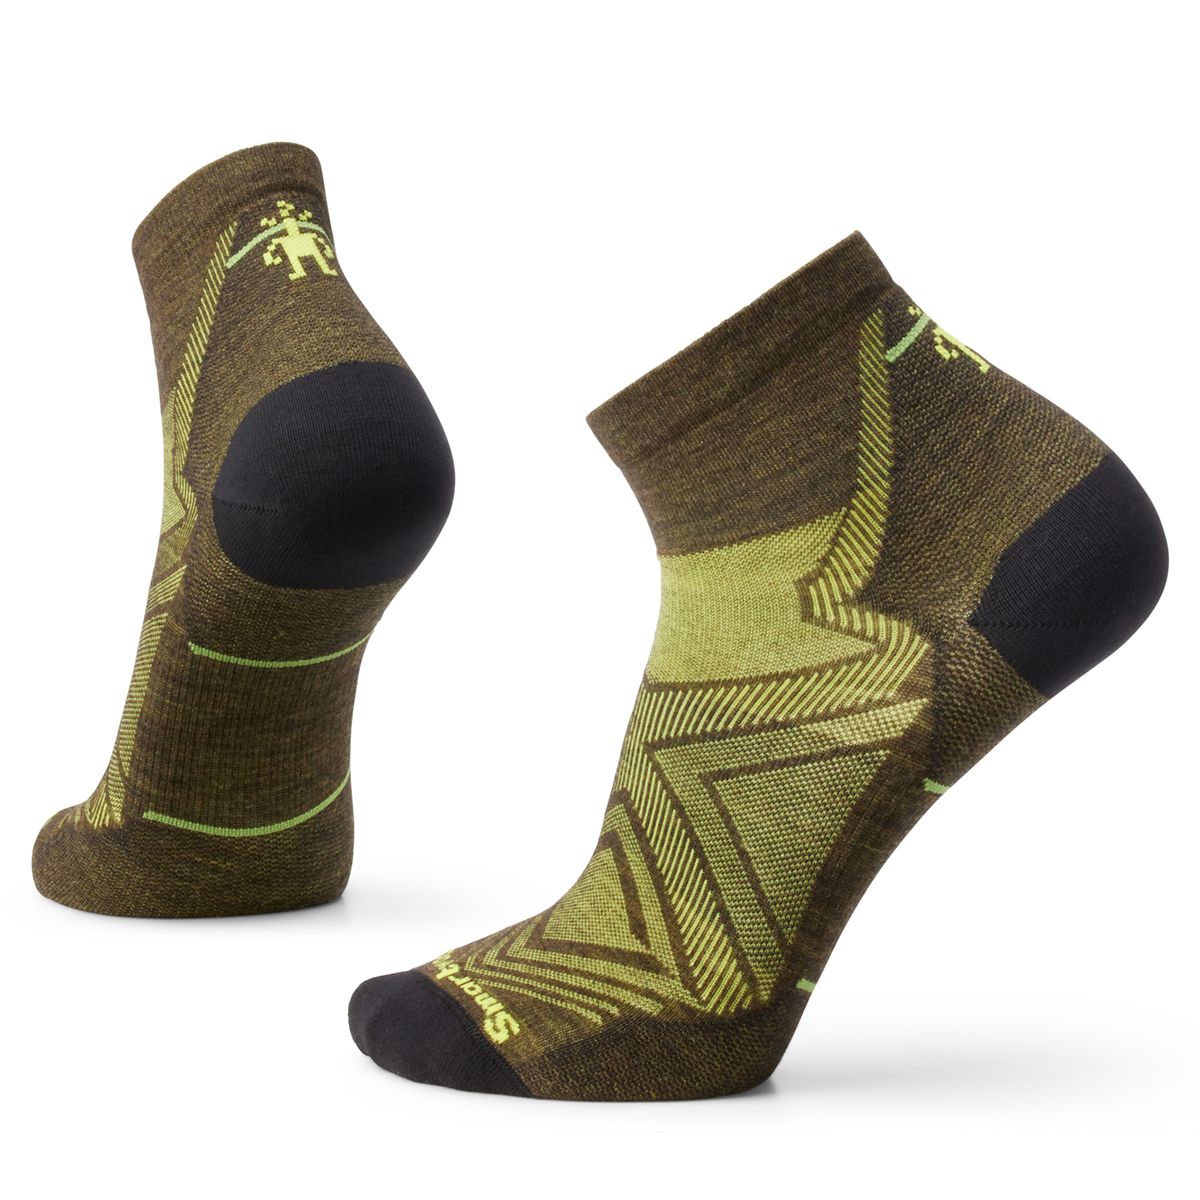 https://smartwool.ca/media/catalog/product/cache/7b241bfd6c26fd1ffc0d56d7717f5c2b/s/w/sw001653d11-1-p_1.jpg